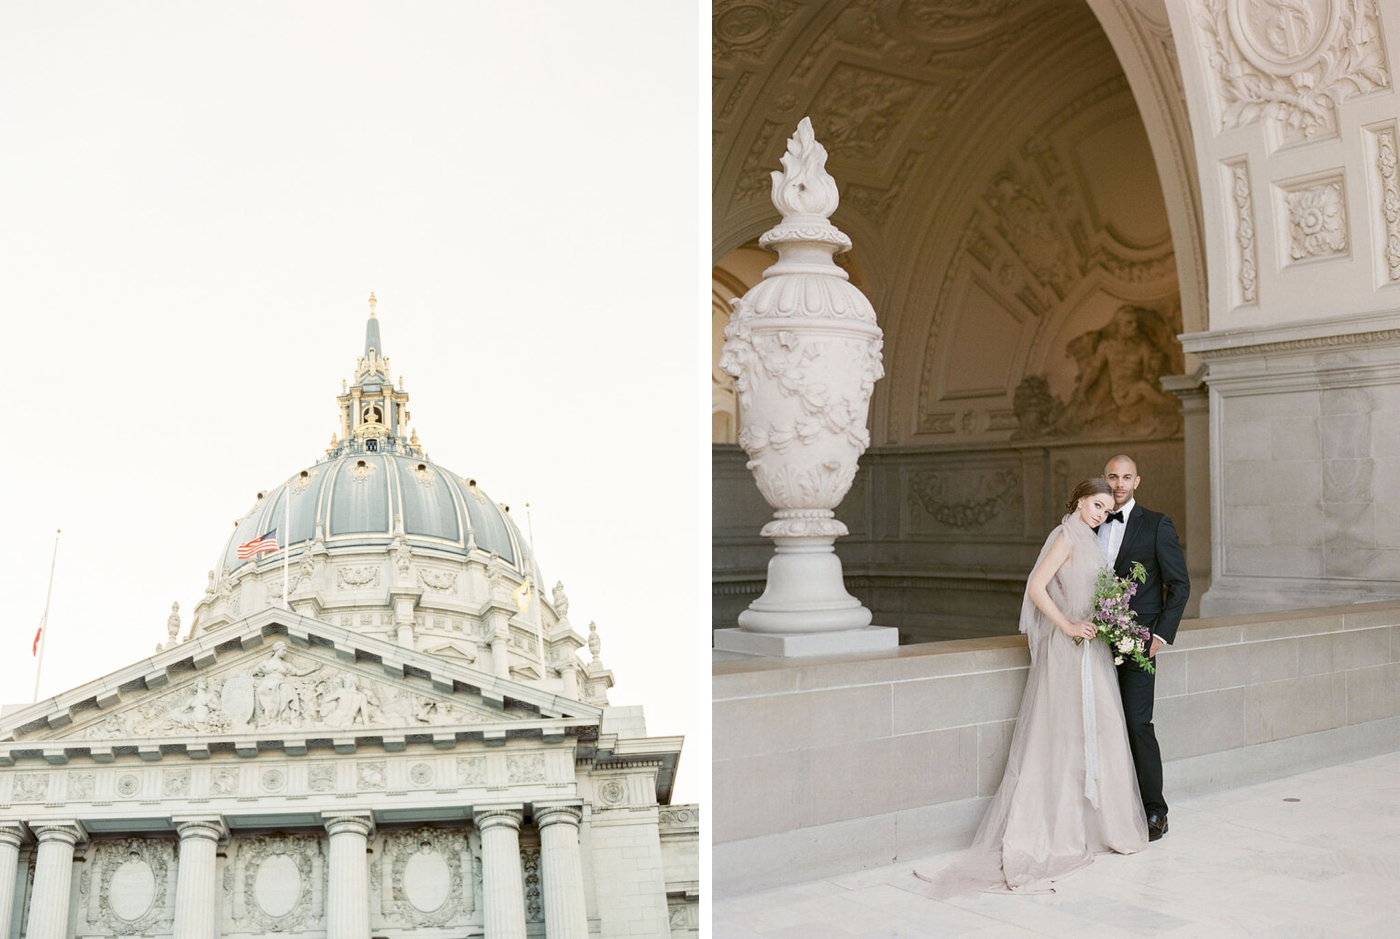 9 Gorgeous Multicultural Weddings That Will Make You Swoon